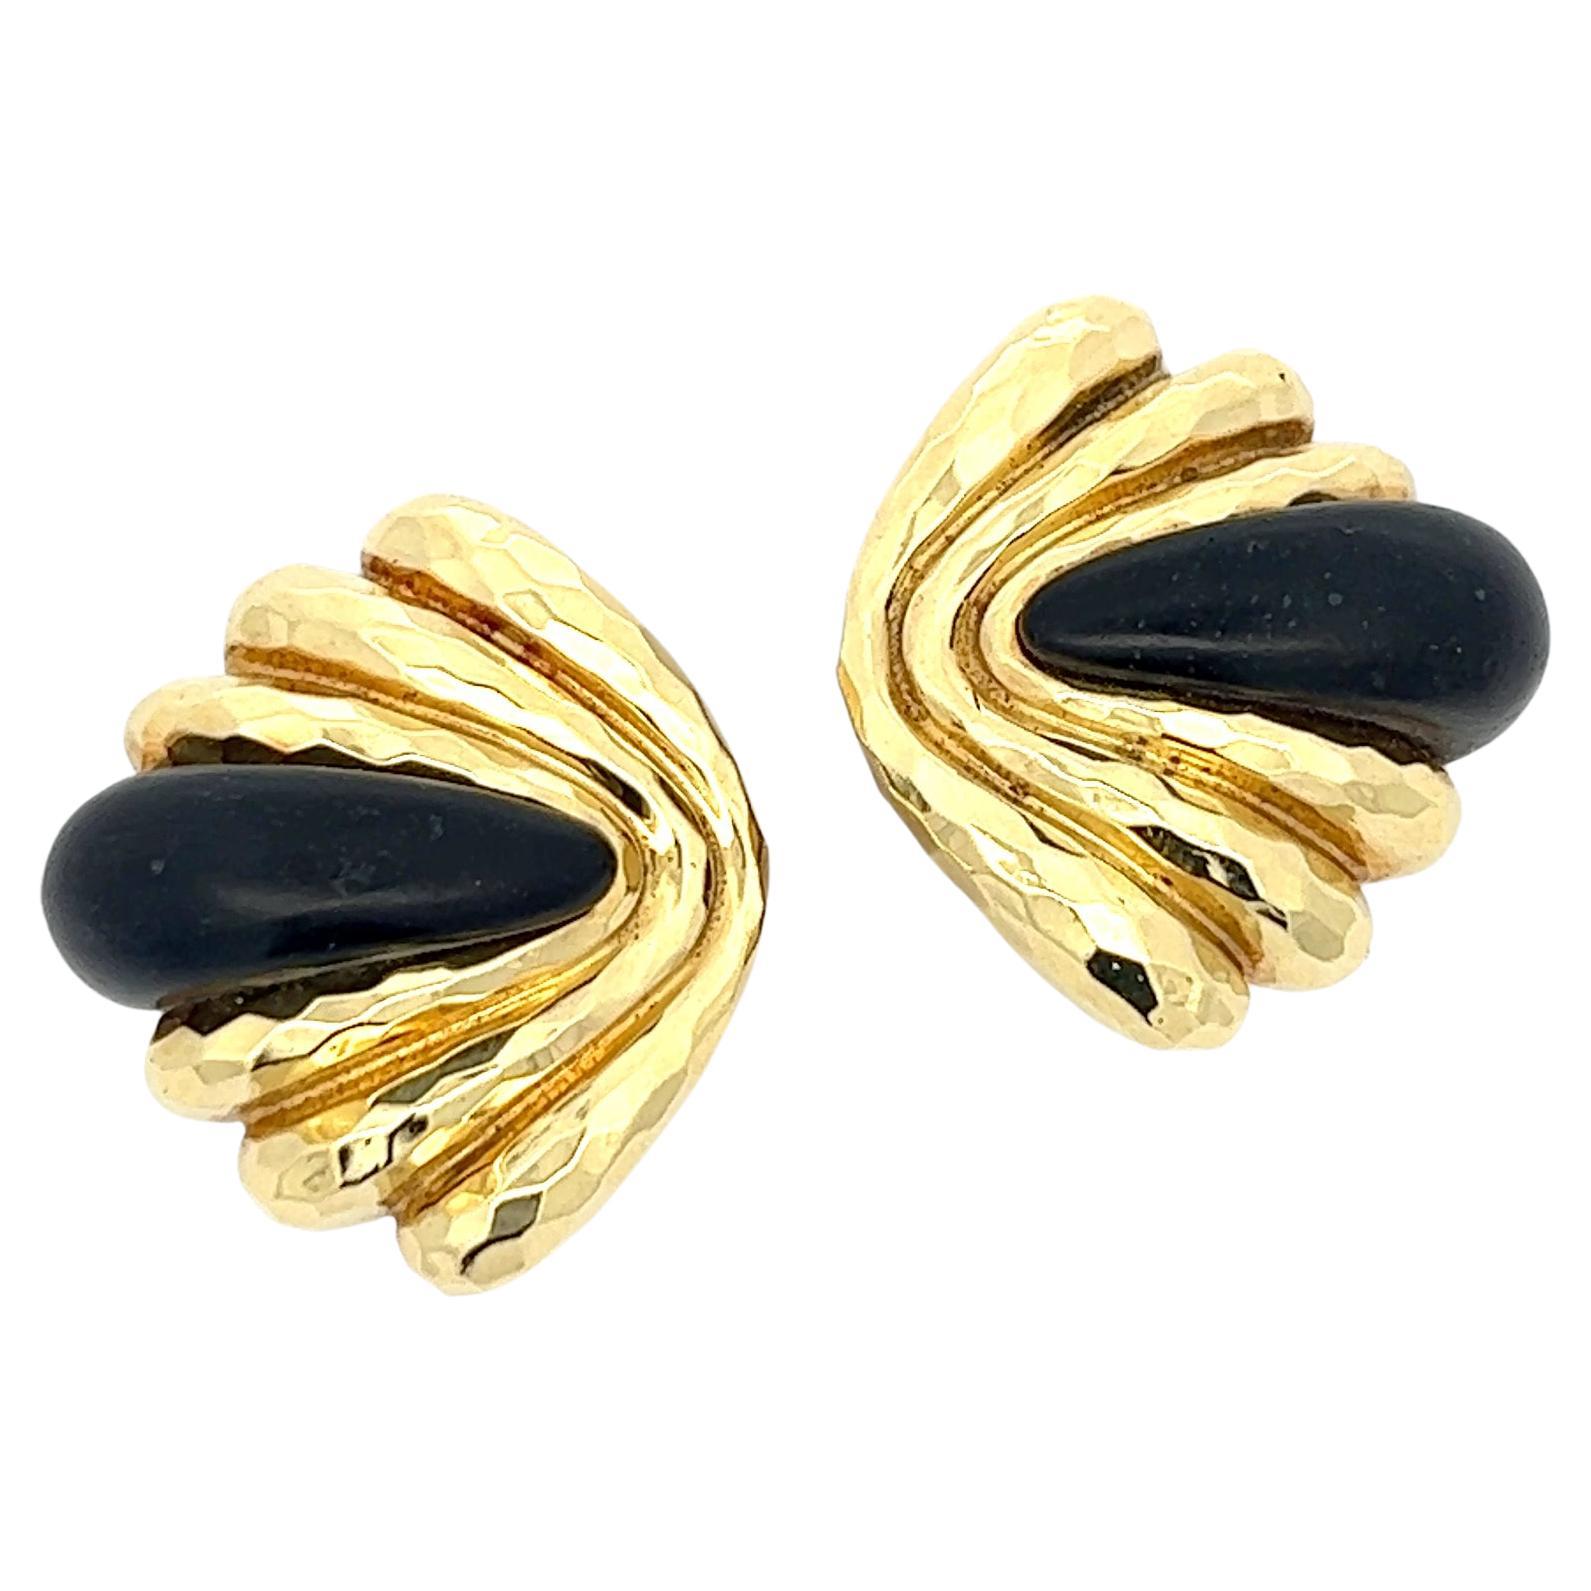 A pair of 18k yellow gold and Ebony "Faceted" ear clips by Henry Dunay